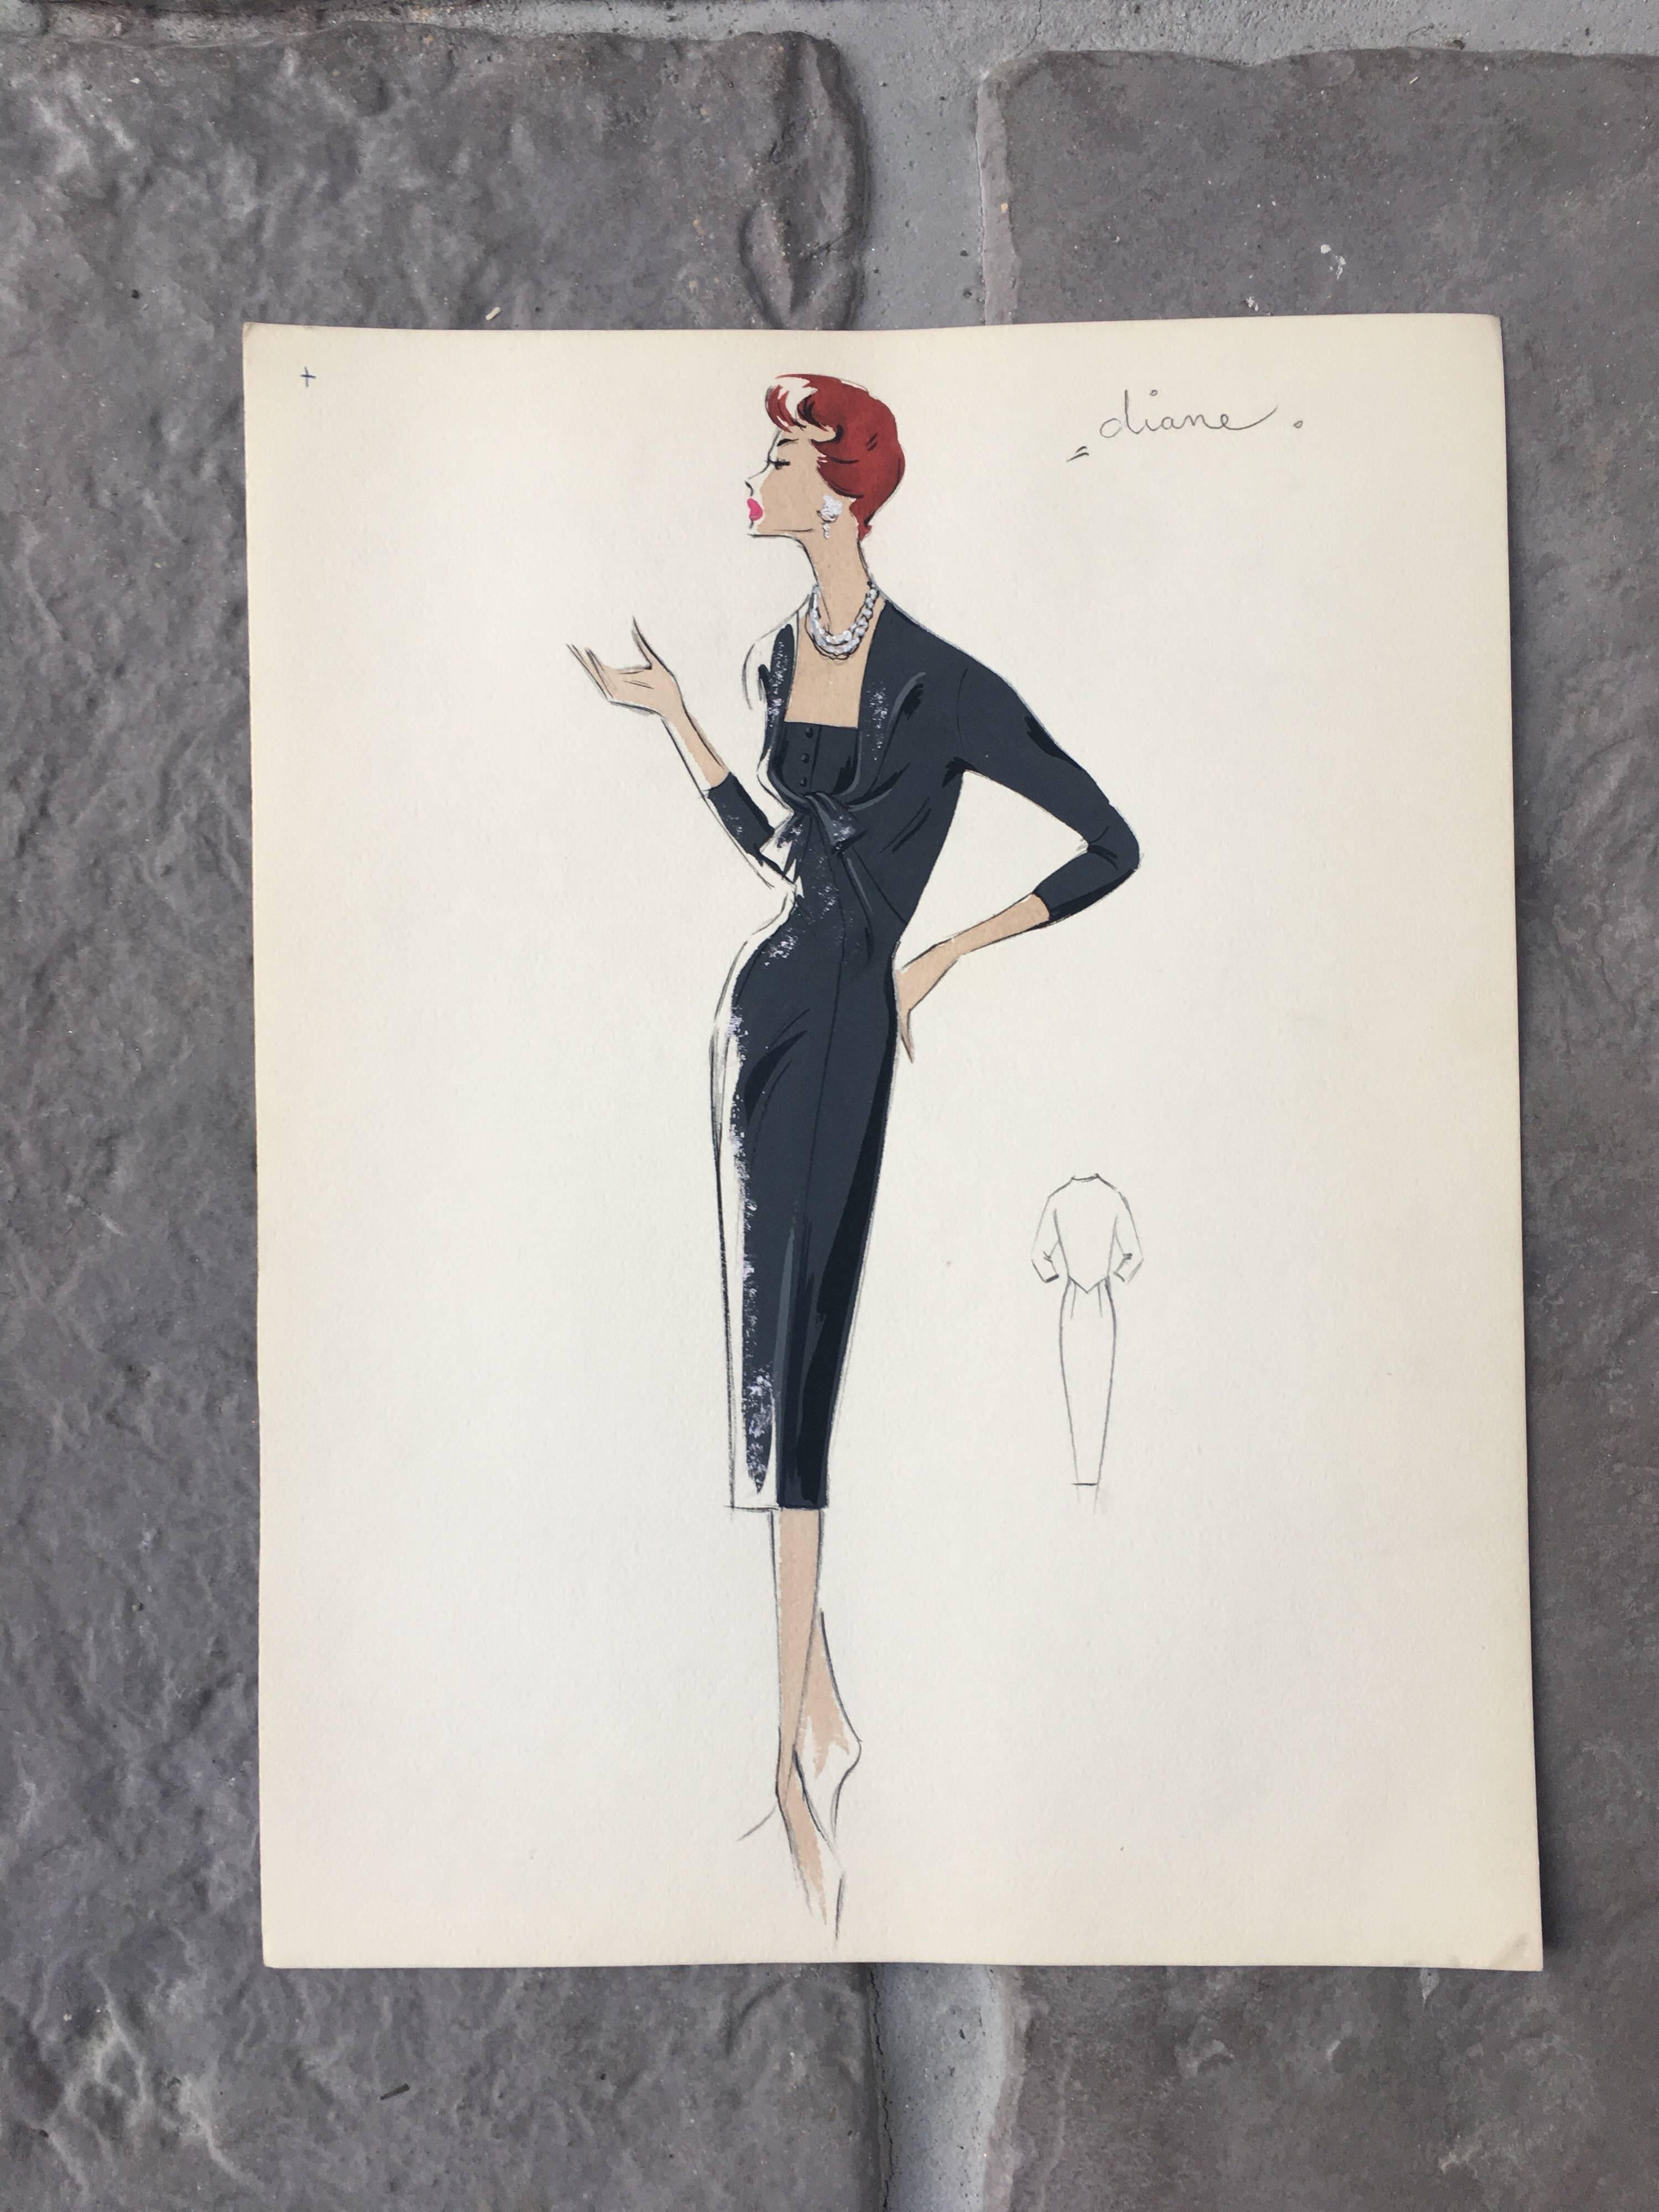 Lady in Elegant 1950's Black Dress Parisian Fashion Illustration Sketch - Painting by Unknown